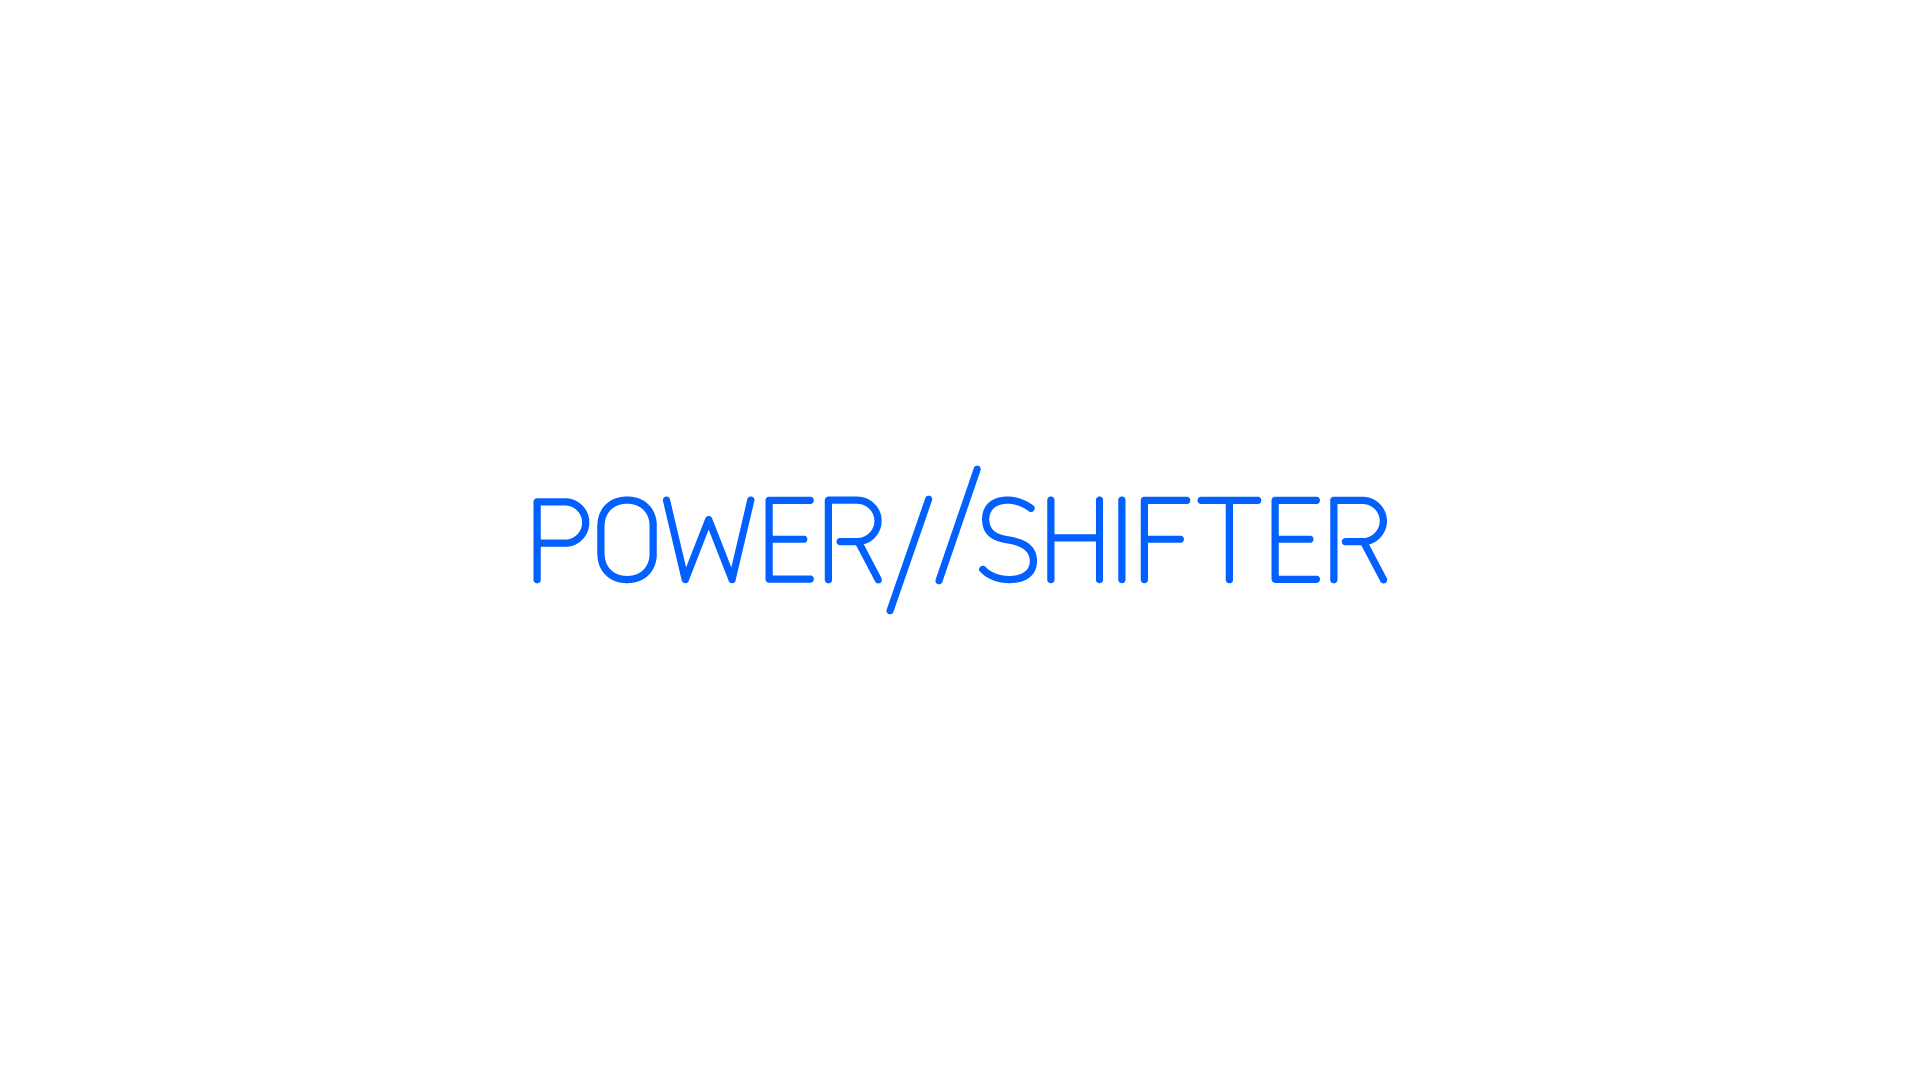 Powershifter Wallpapers